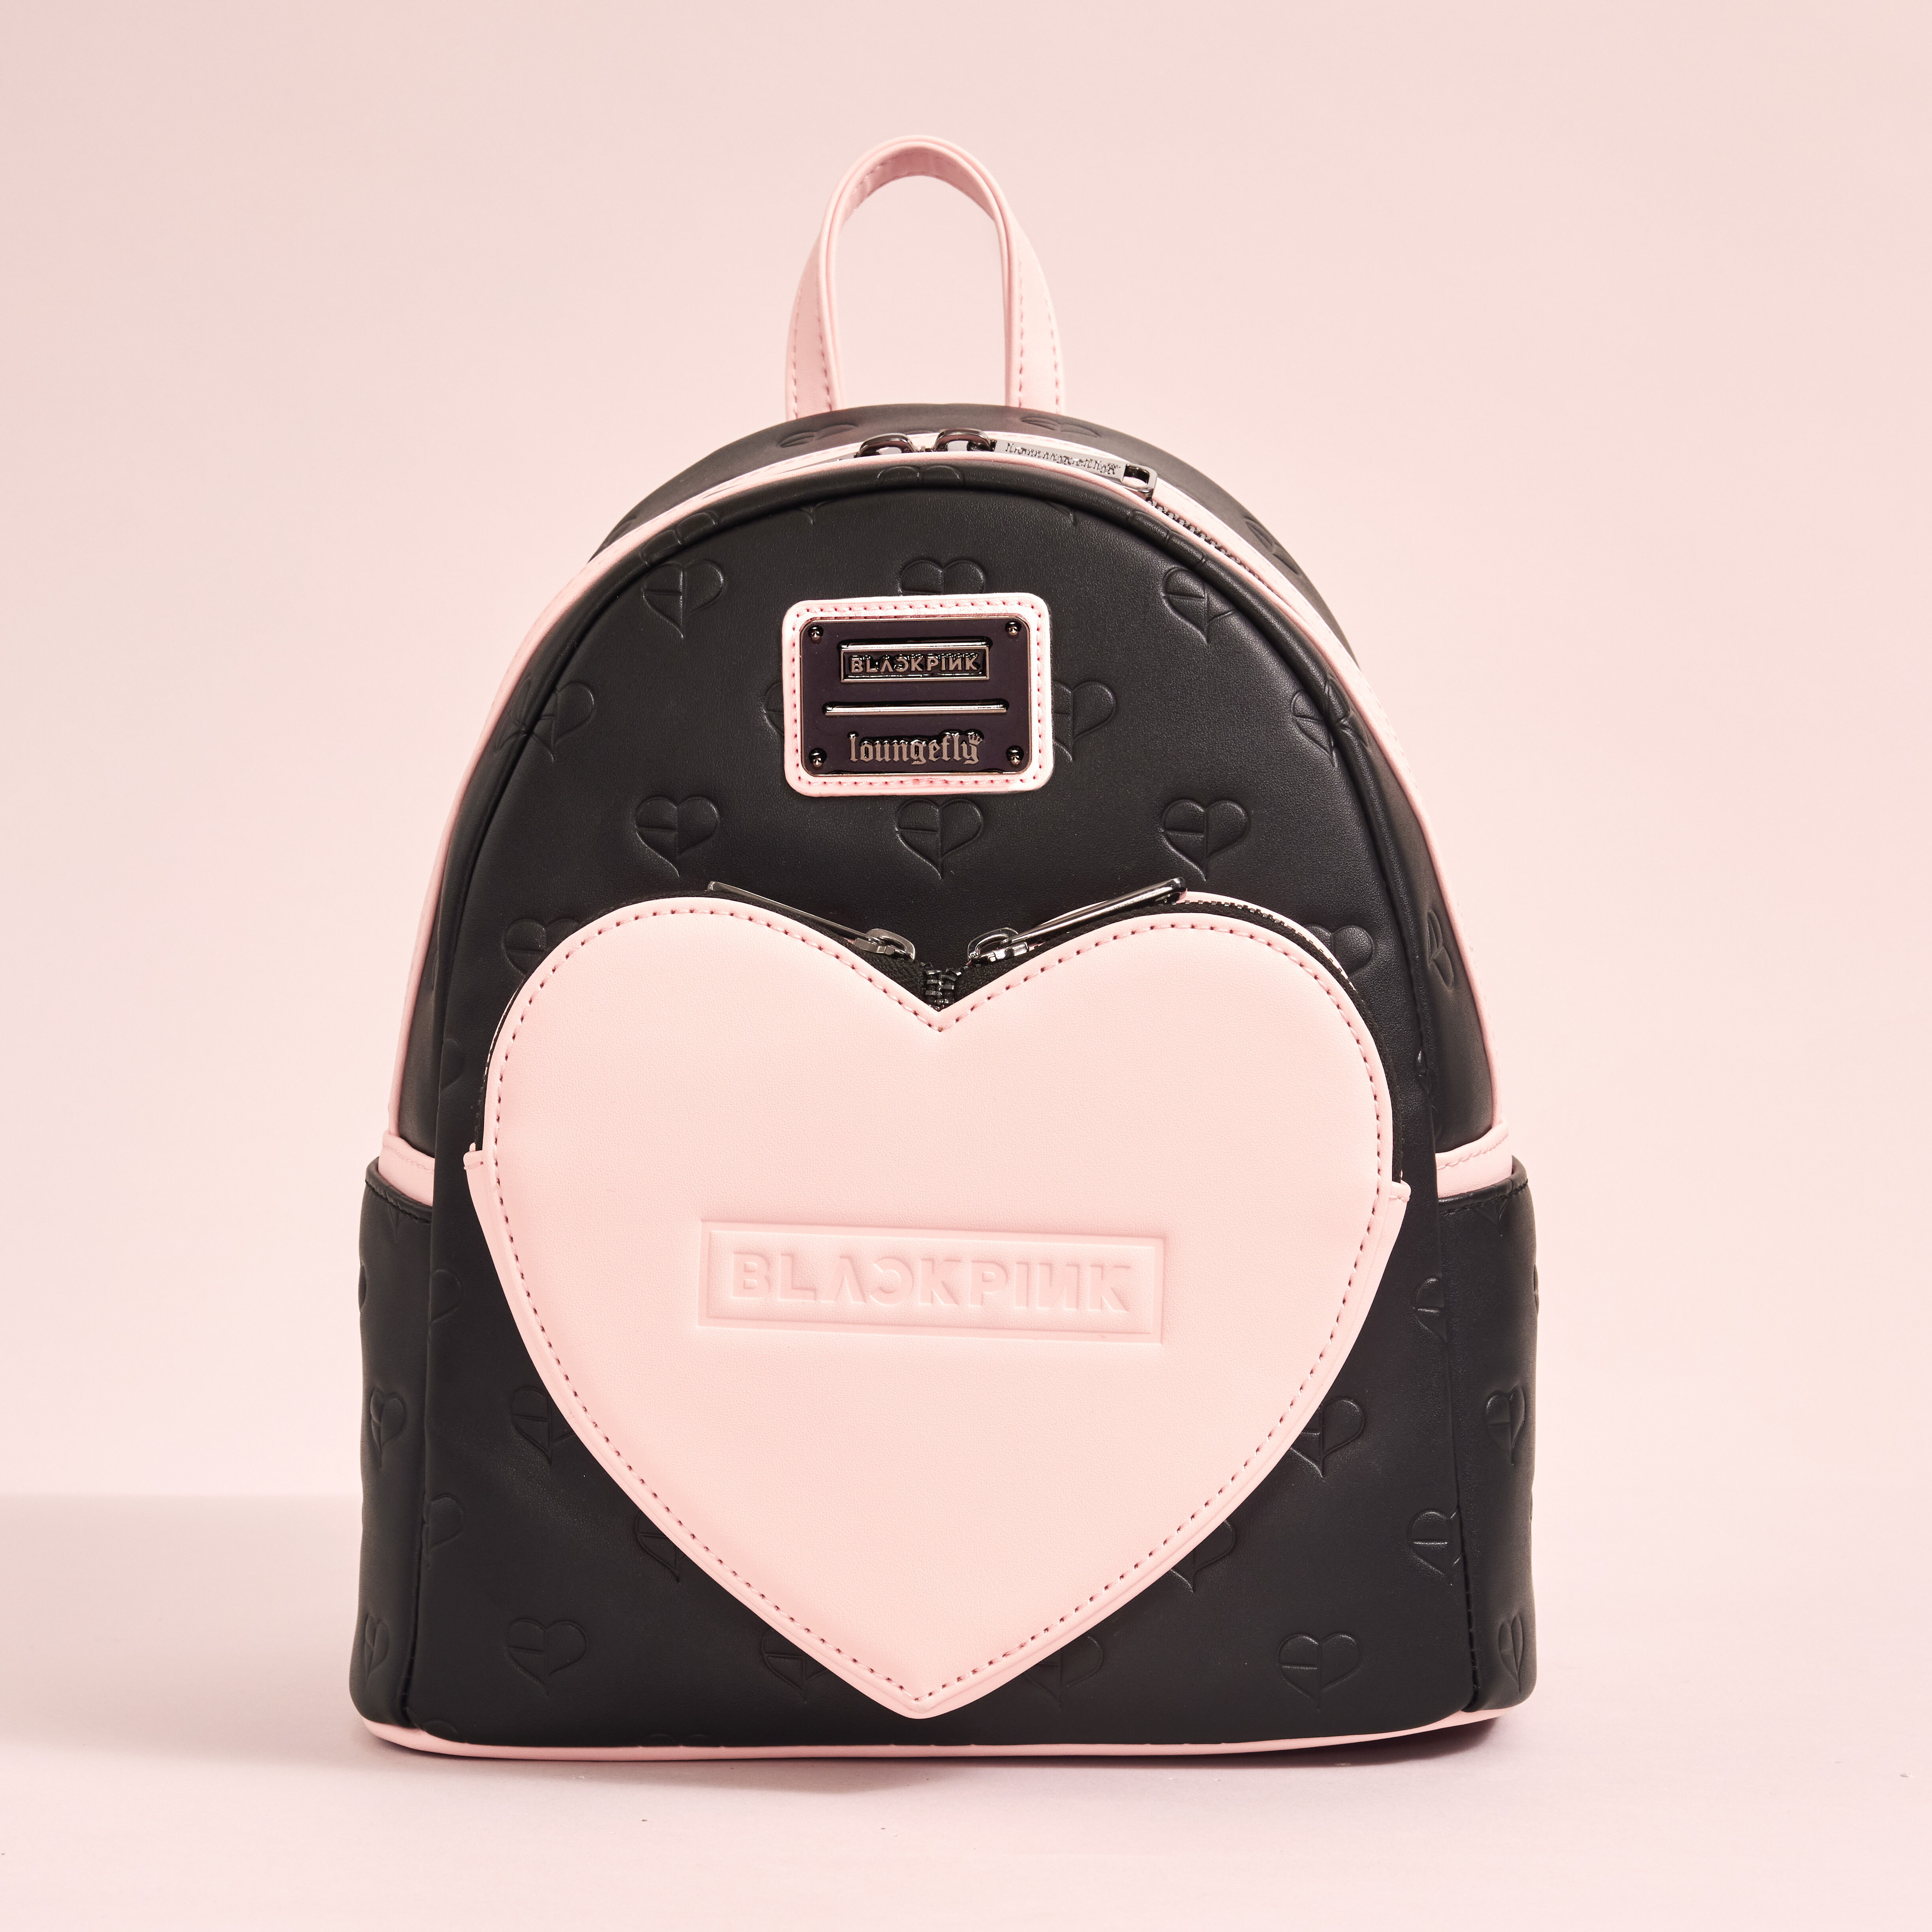 Buy BLACKPINK All-Over Print Heart Mini Backpack at Loungefly.